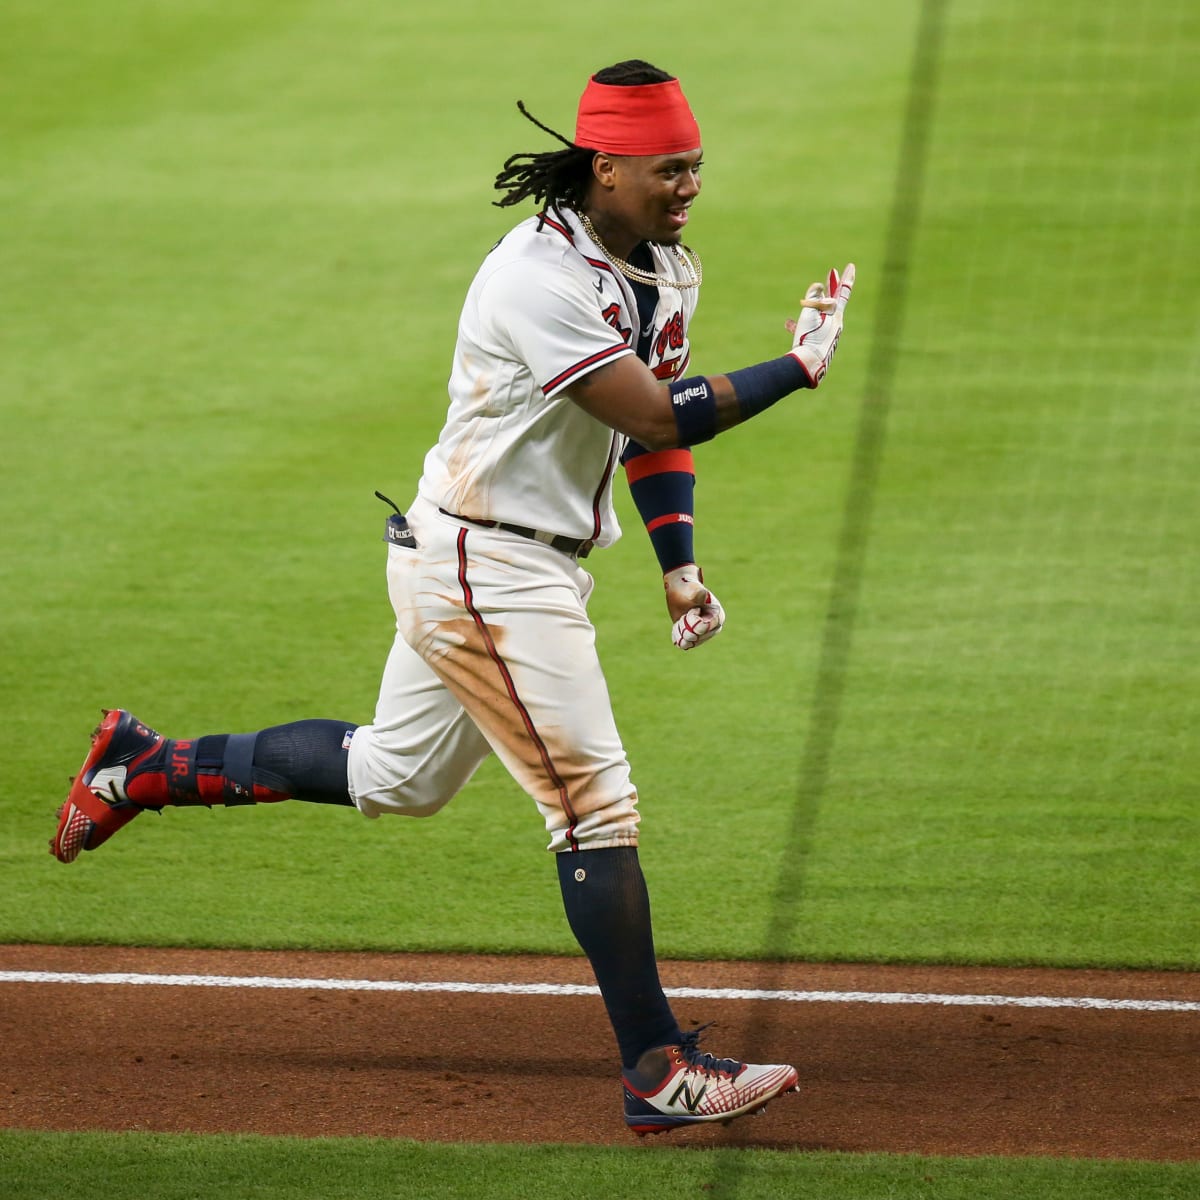 Braves: Even Ronald Acuña's bat drops are Opening Day ready